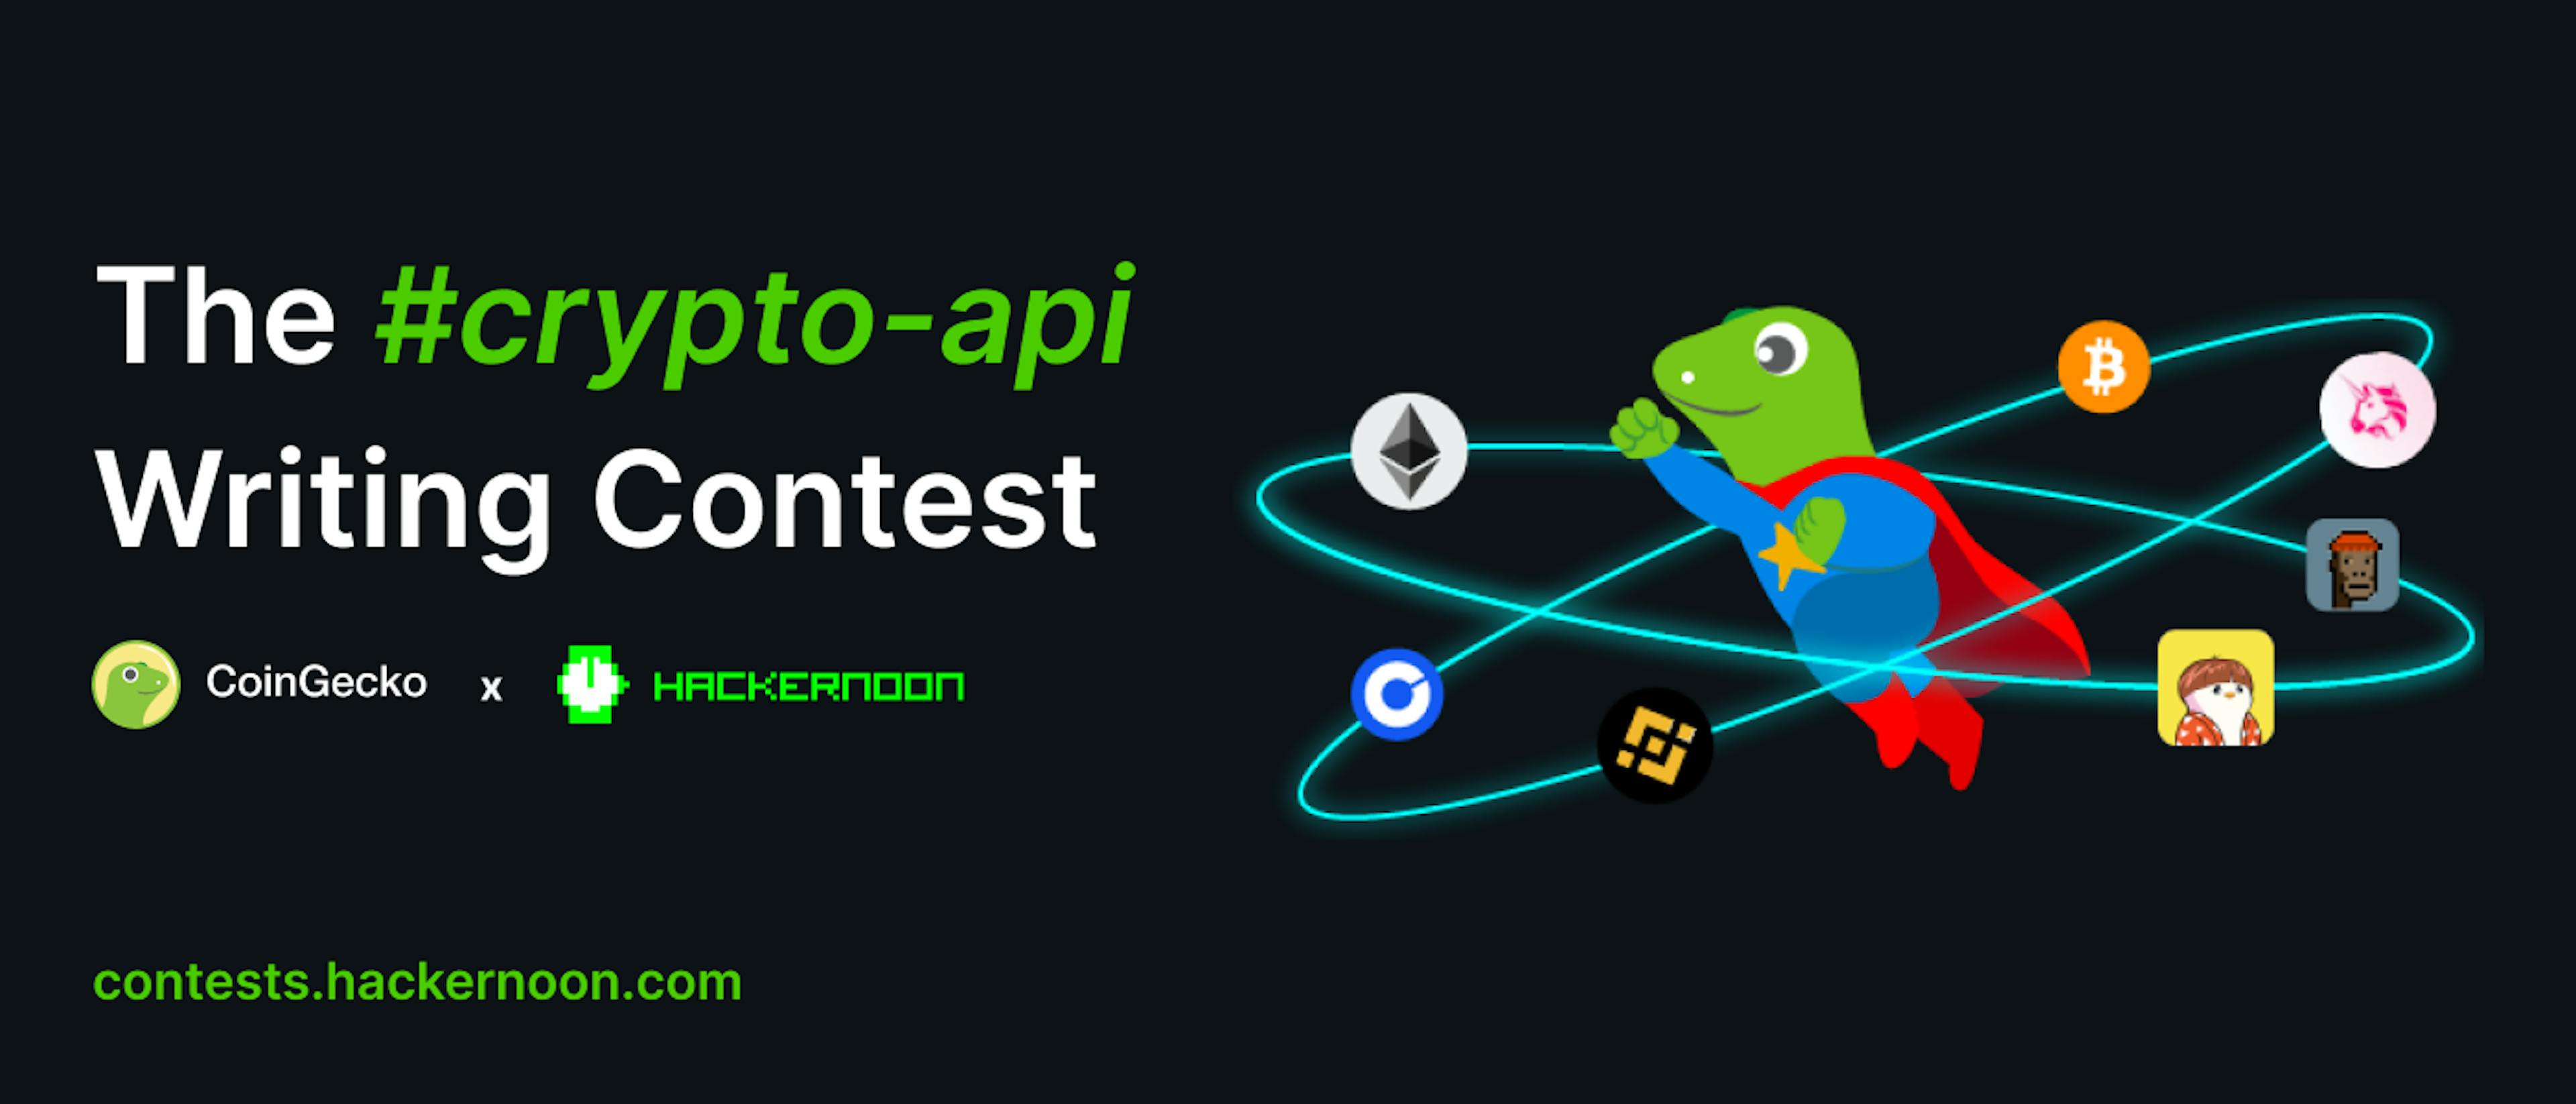 featured image - Last Call: Less than a Month Left to Enter the #crypto-api Writing Contest